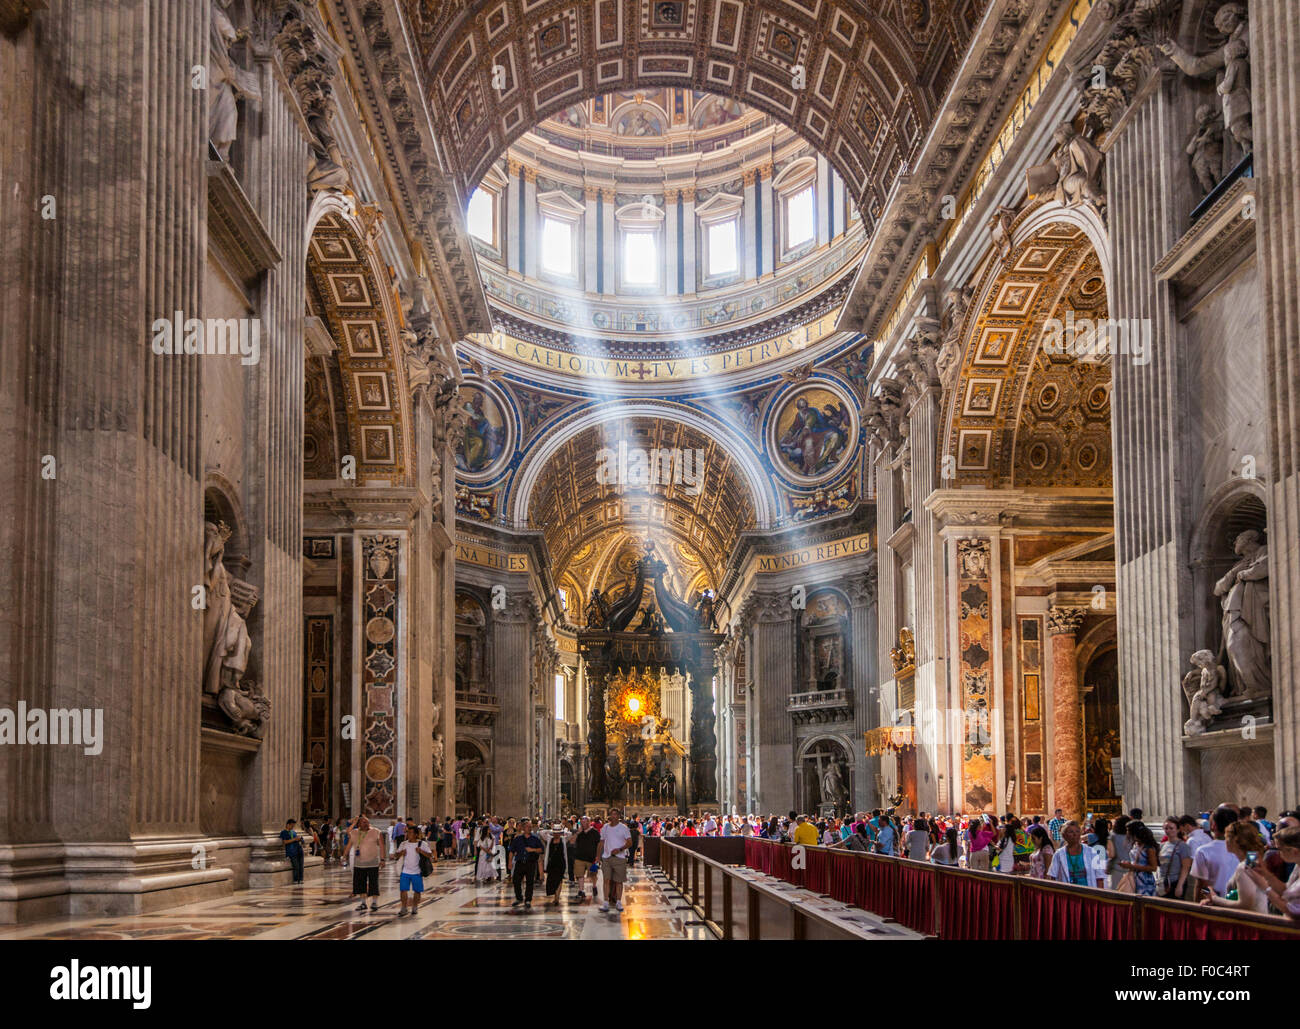 Tourists and visitors inside St Peters Basilica with light shafts coming through the dome roof  Interior Rome Italy EU Europe Stock Photo